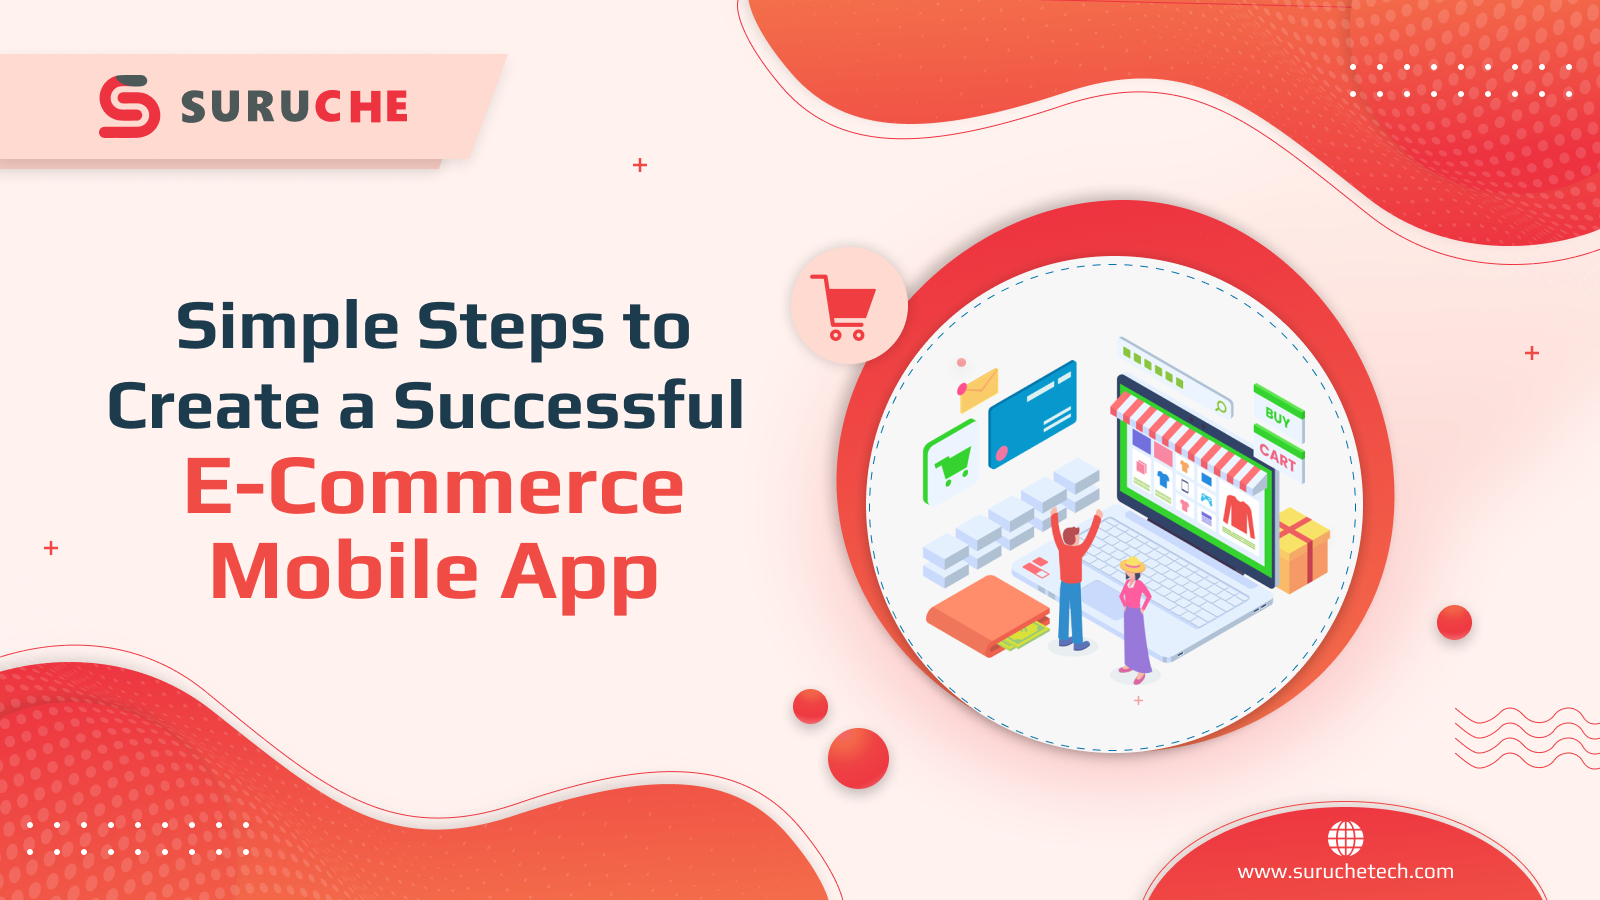 Simple Steps to Create a Successful E-Commerce Mobile App